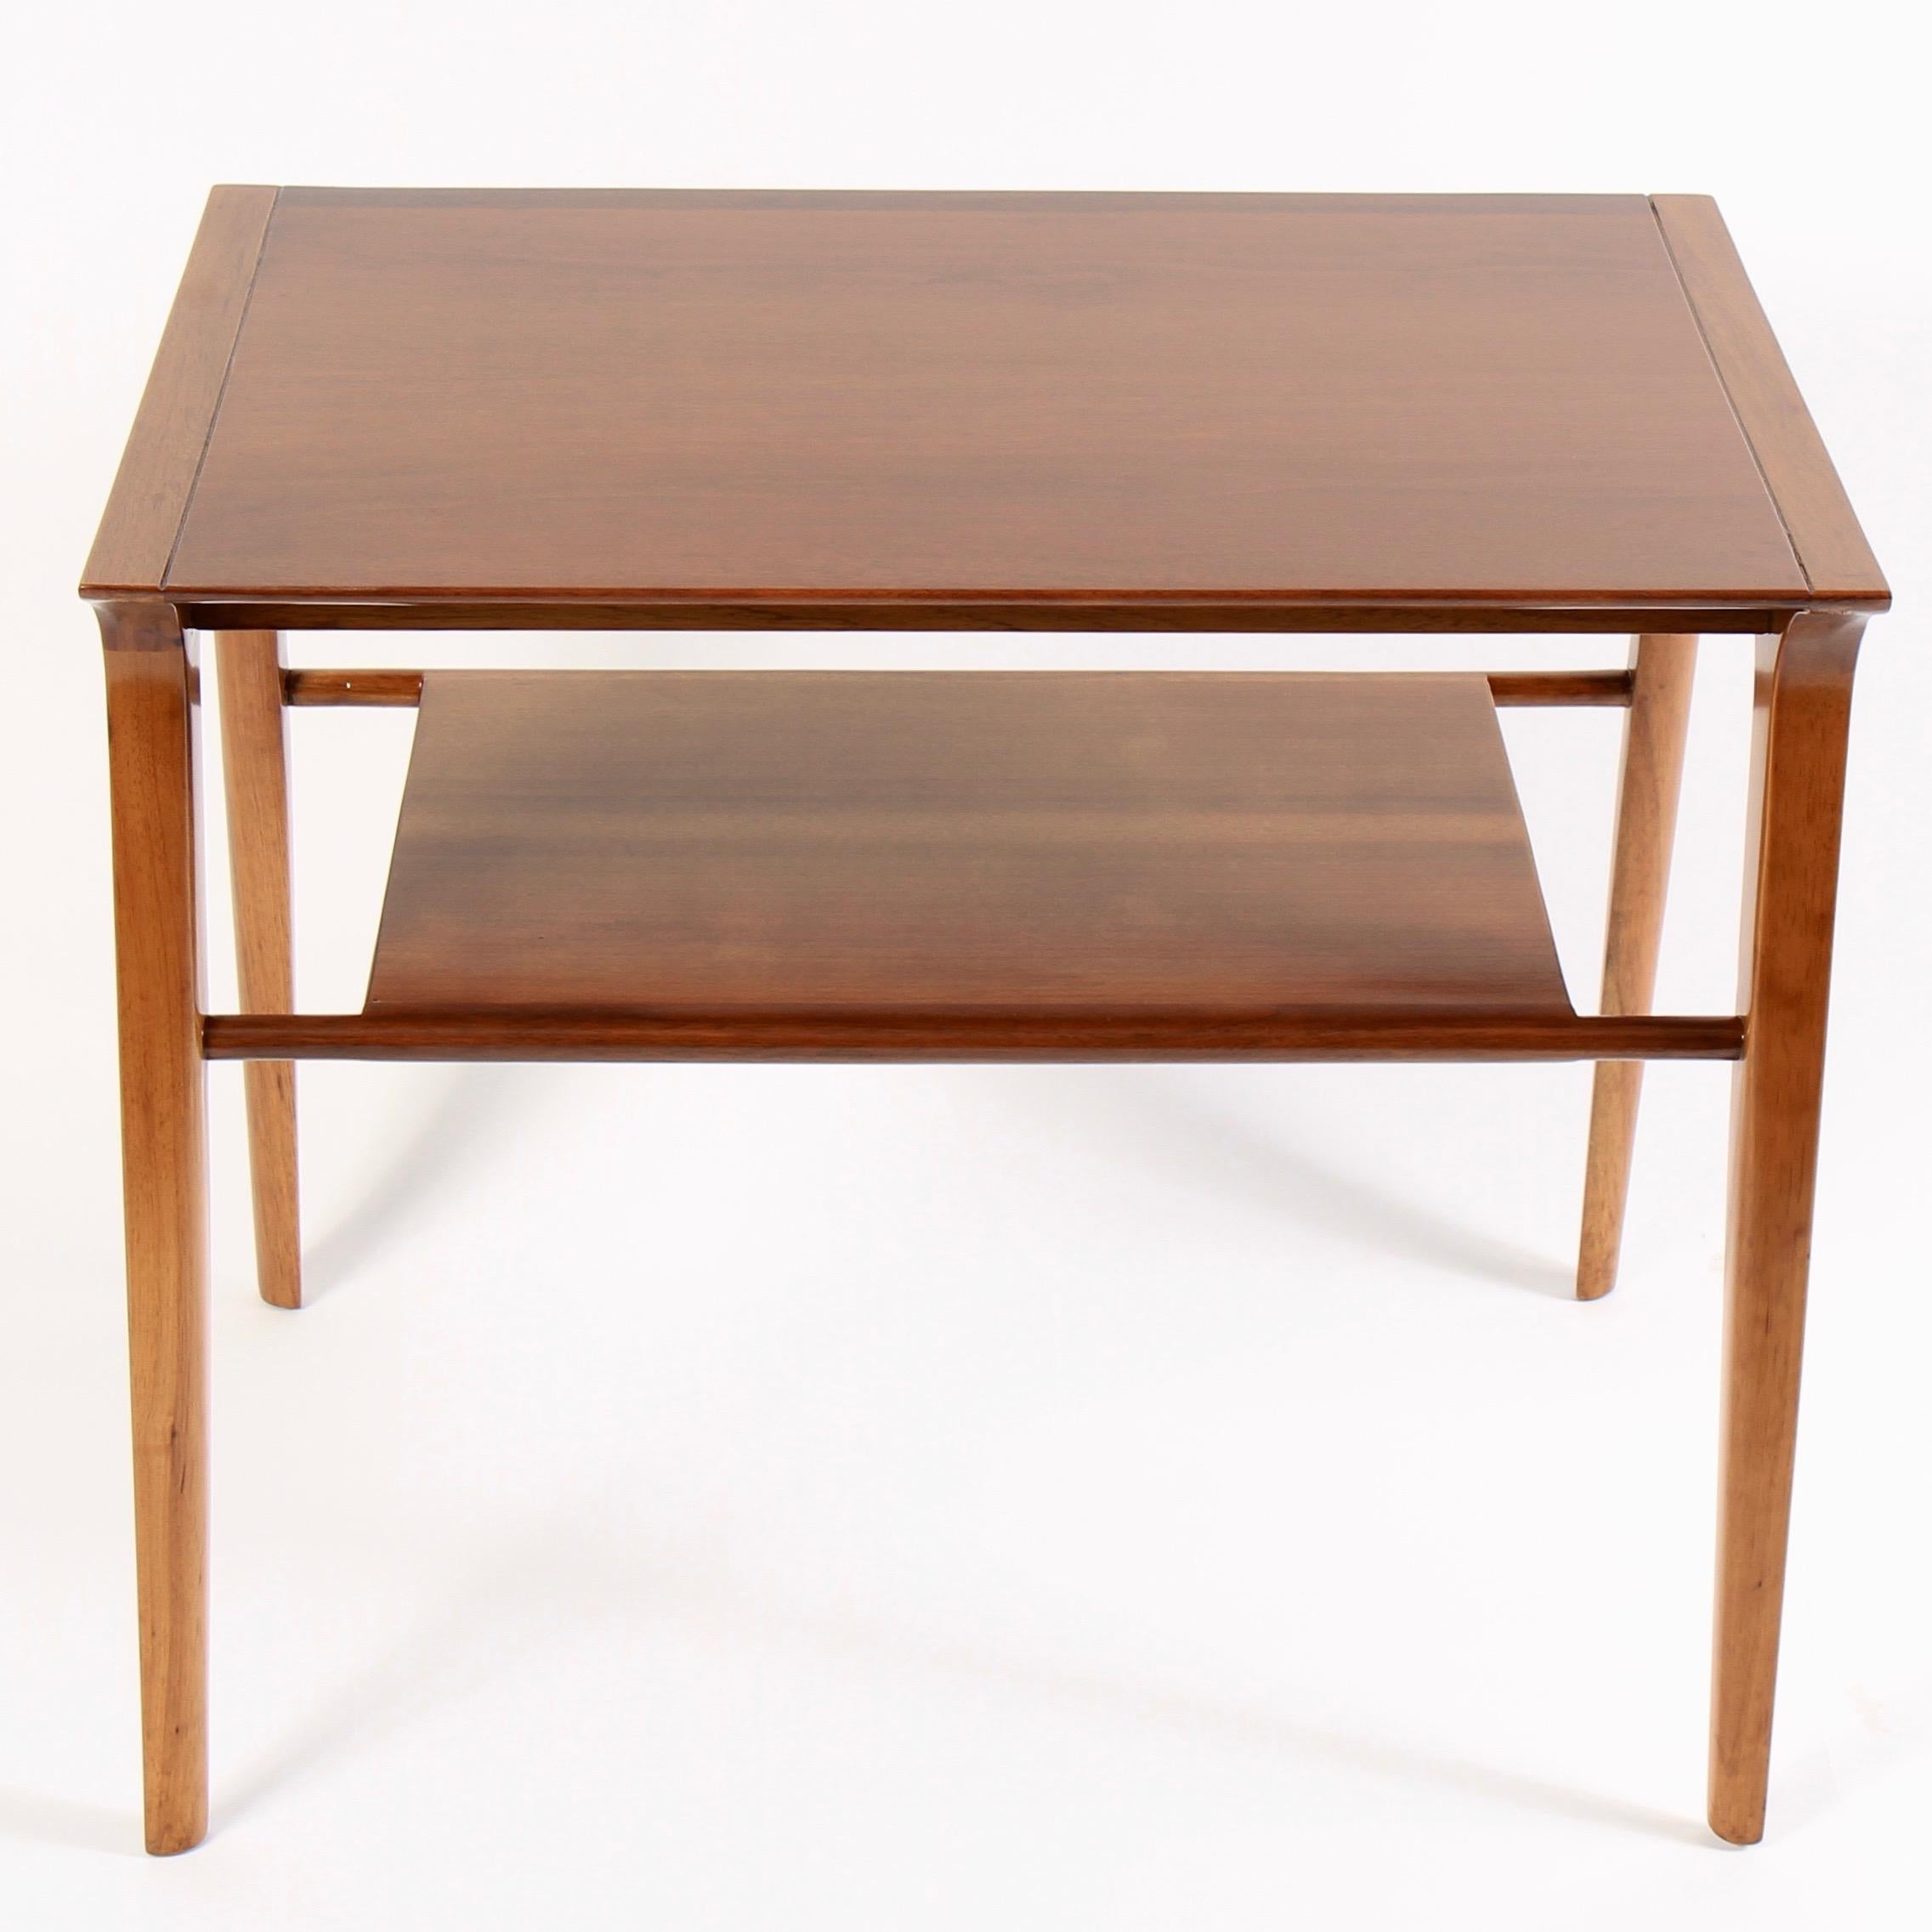 Mid-Century Modern side table designed by American designer John Van Koert and manufactured by Drexel in the United States, circa 1950s. With a solid and stabile walnut wood frame and two tapered shelves, this end/side table illustrates a stylish